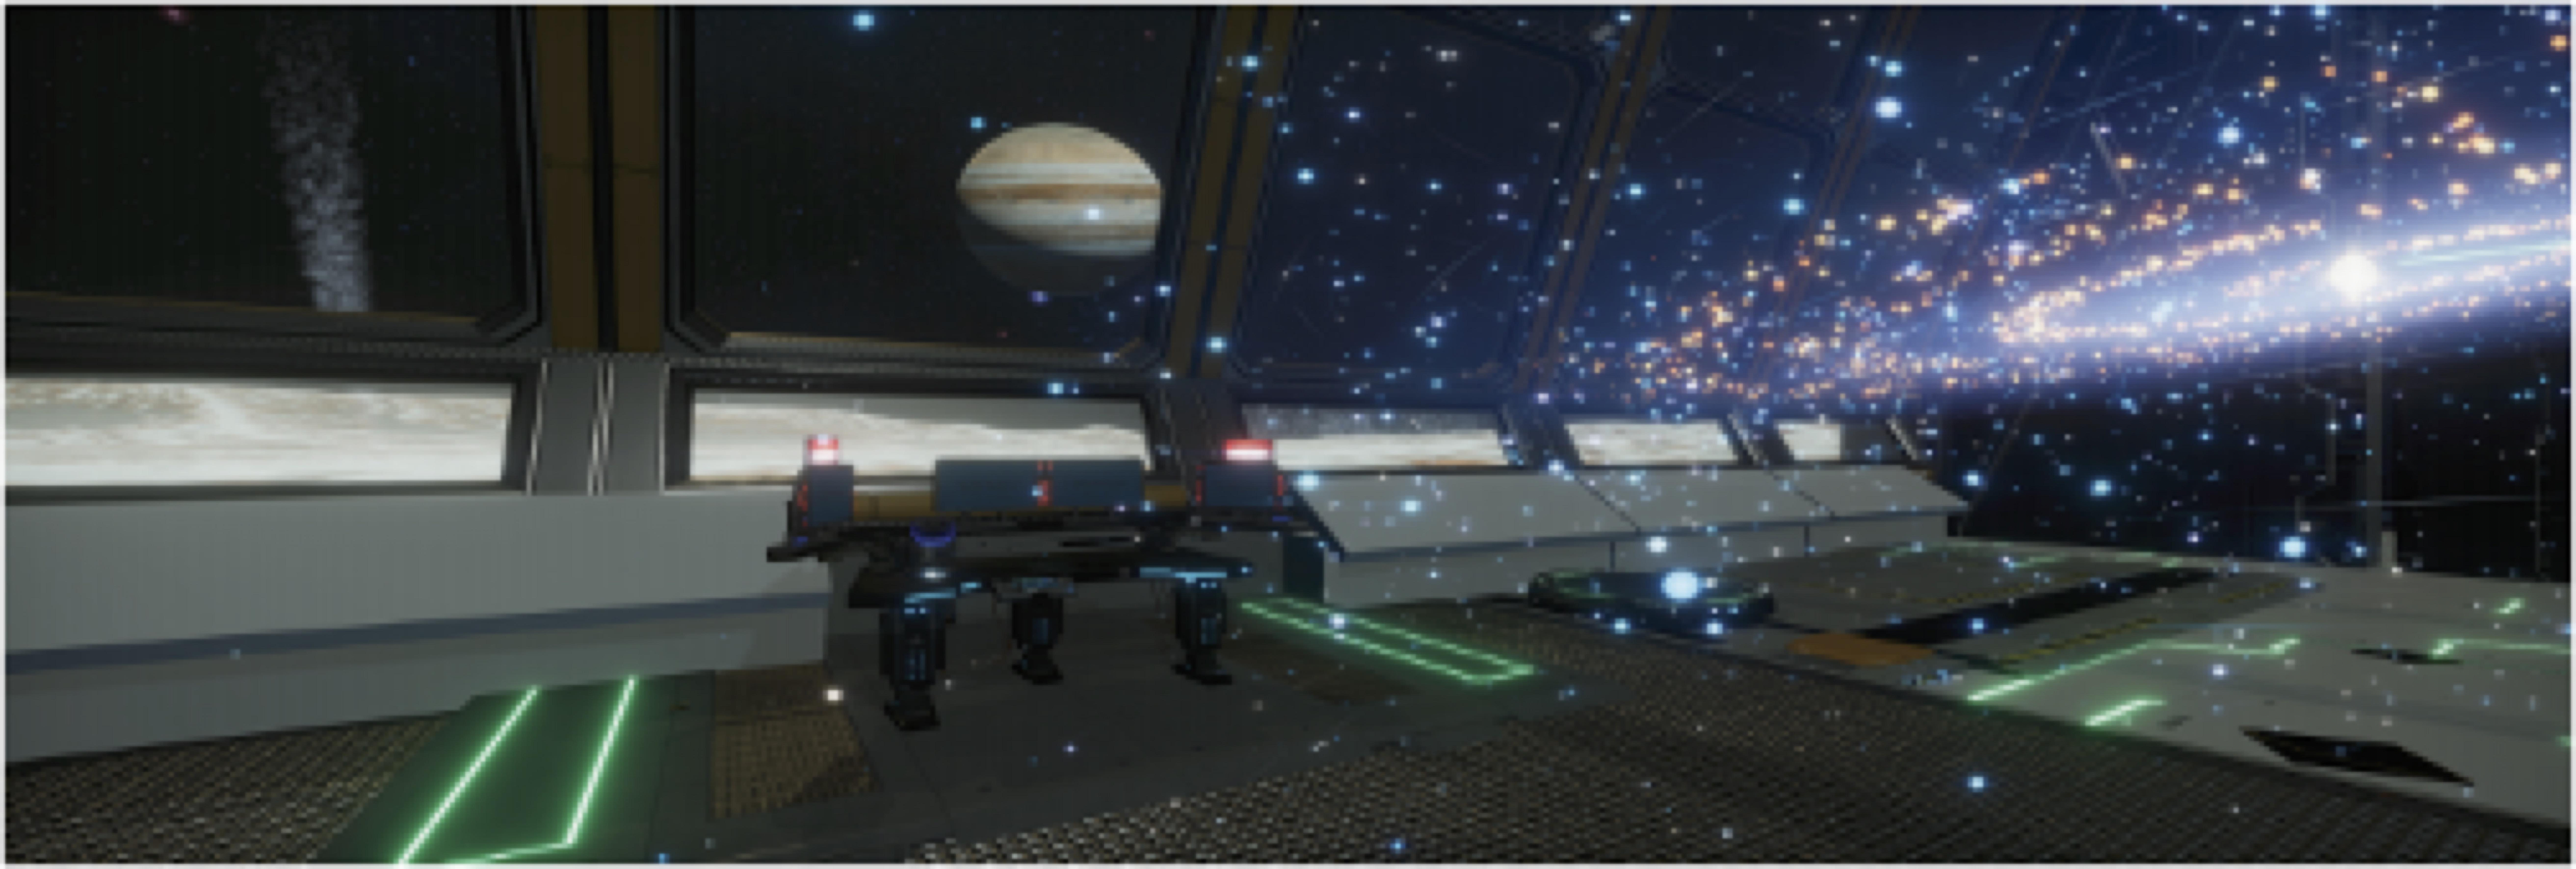 Screenshot image from the UniVRSal research project